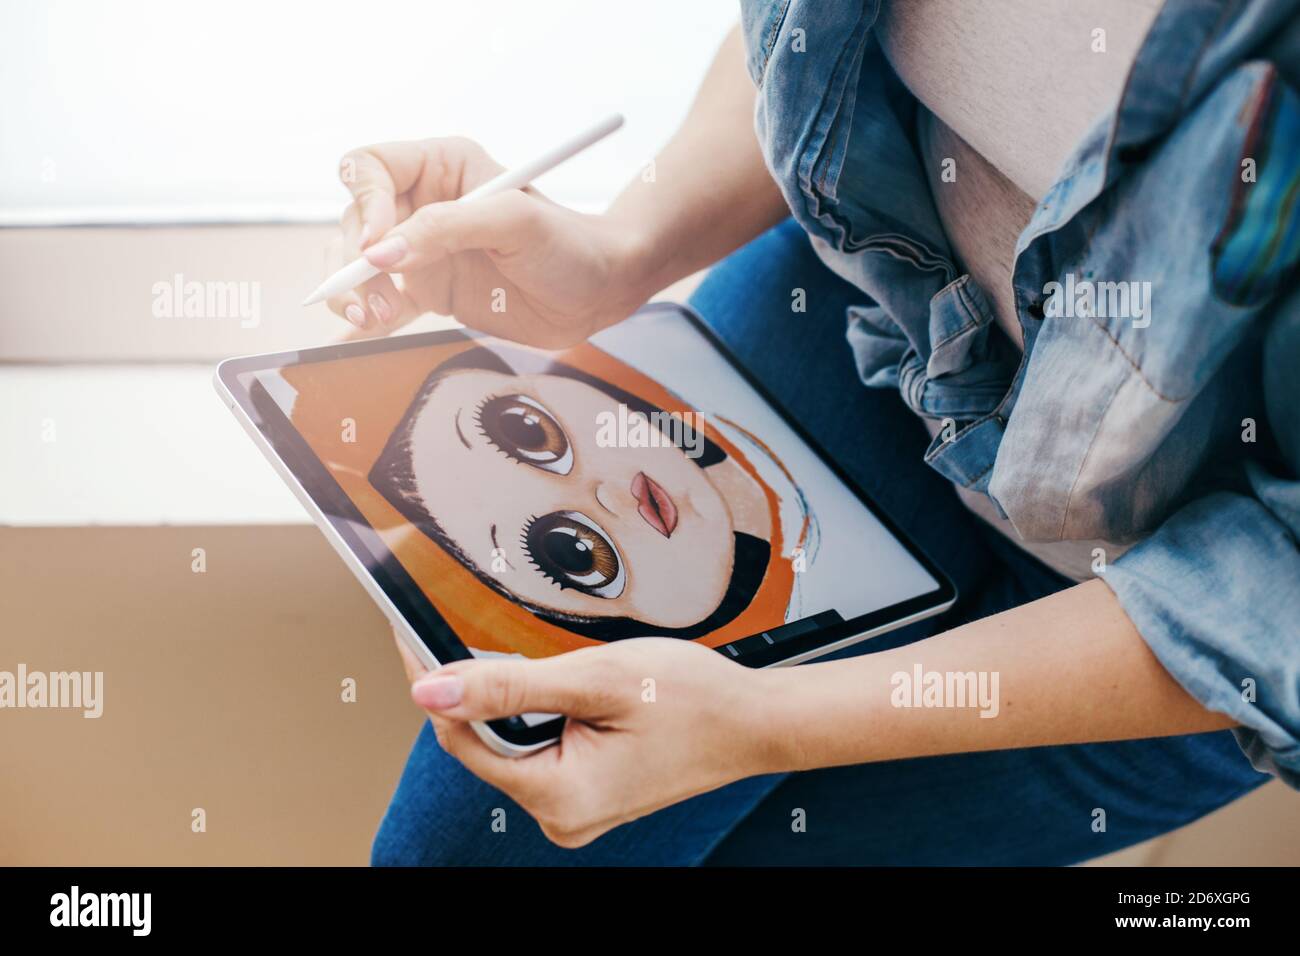 Creative Hobby And Freelance Artistic Work Job Caucasian Woman Artist Illustrator Painting Drawing On Touch Pad Digital Tablet With Stylus Process O Stock Photo Alamy